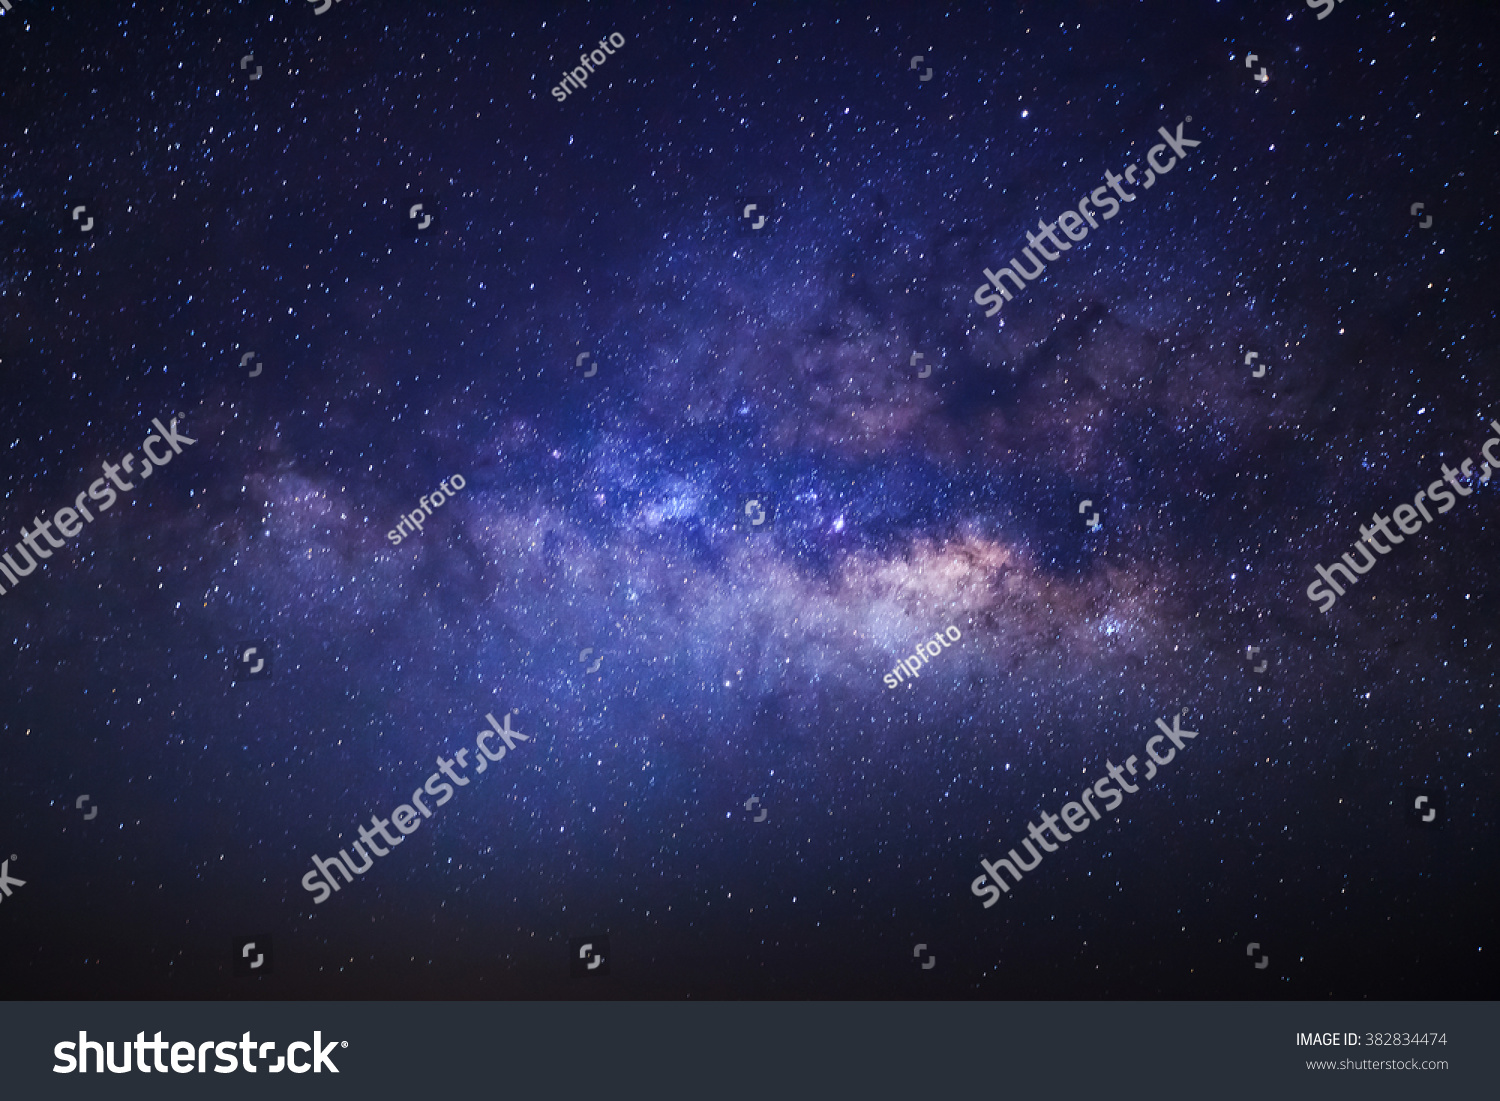 Milky Way galaxy with stars and space dust in the universe
 #382834474